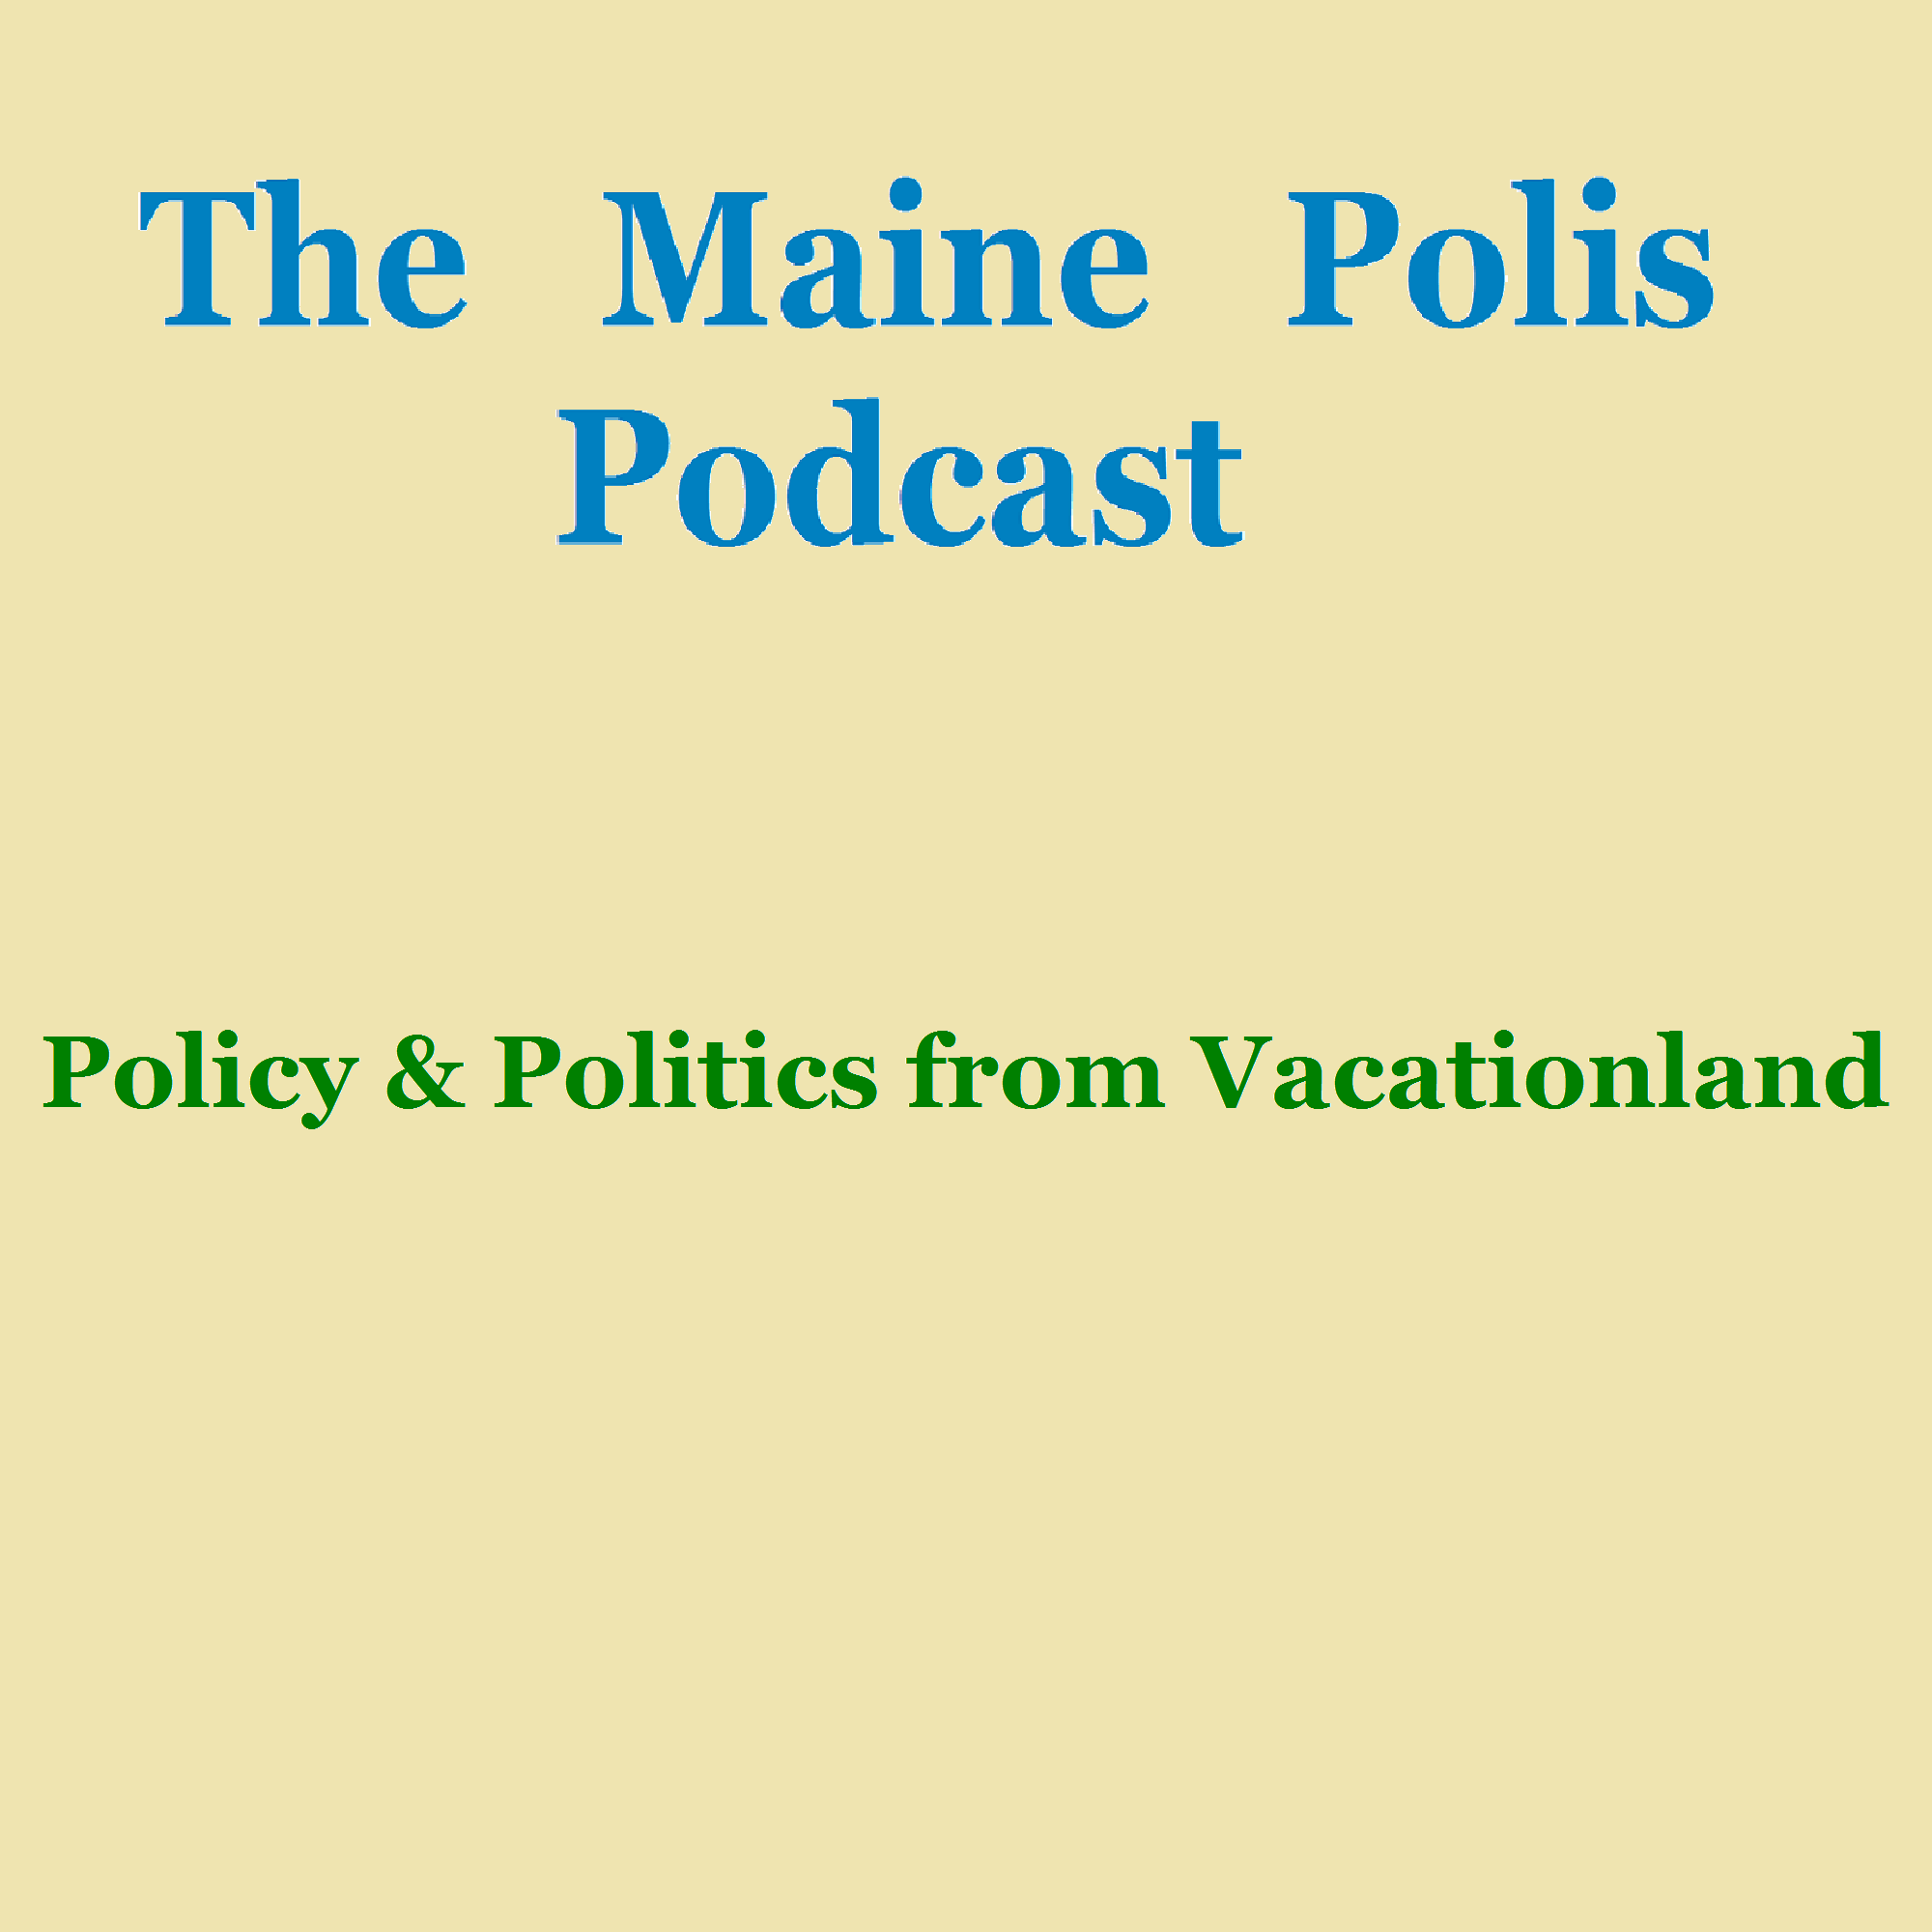 TMP Podcast #11 - How the Maine Dems Became the Largest Voter Block In Maine